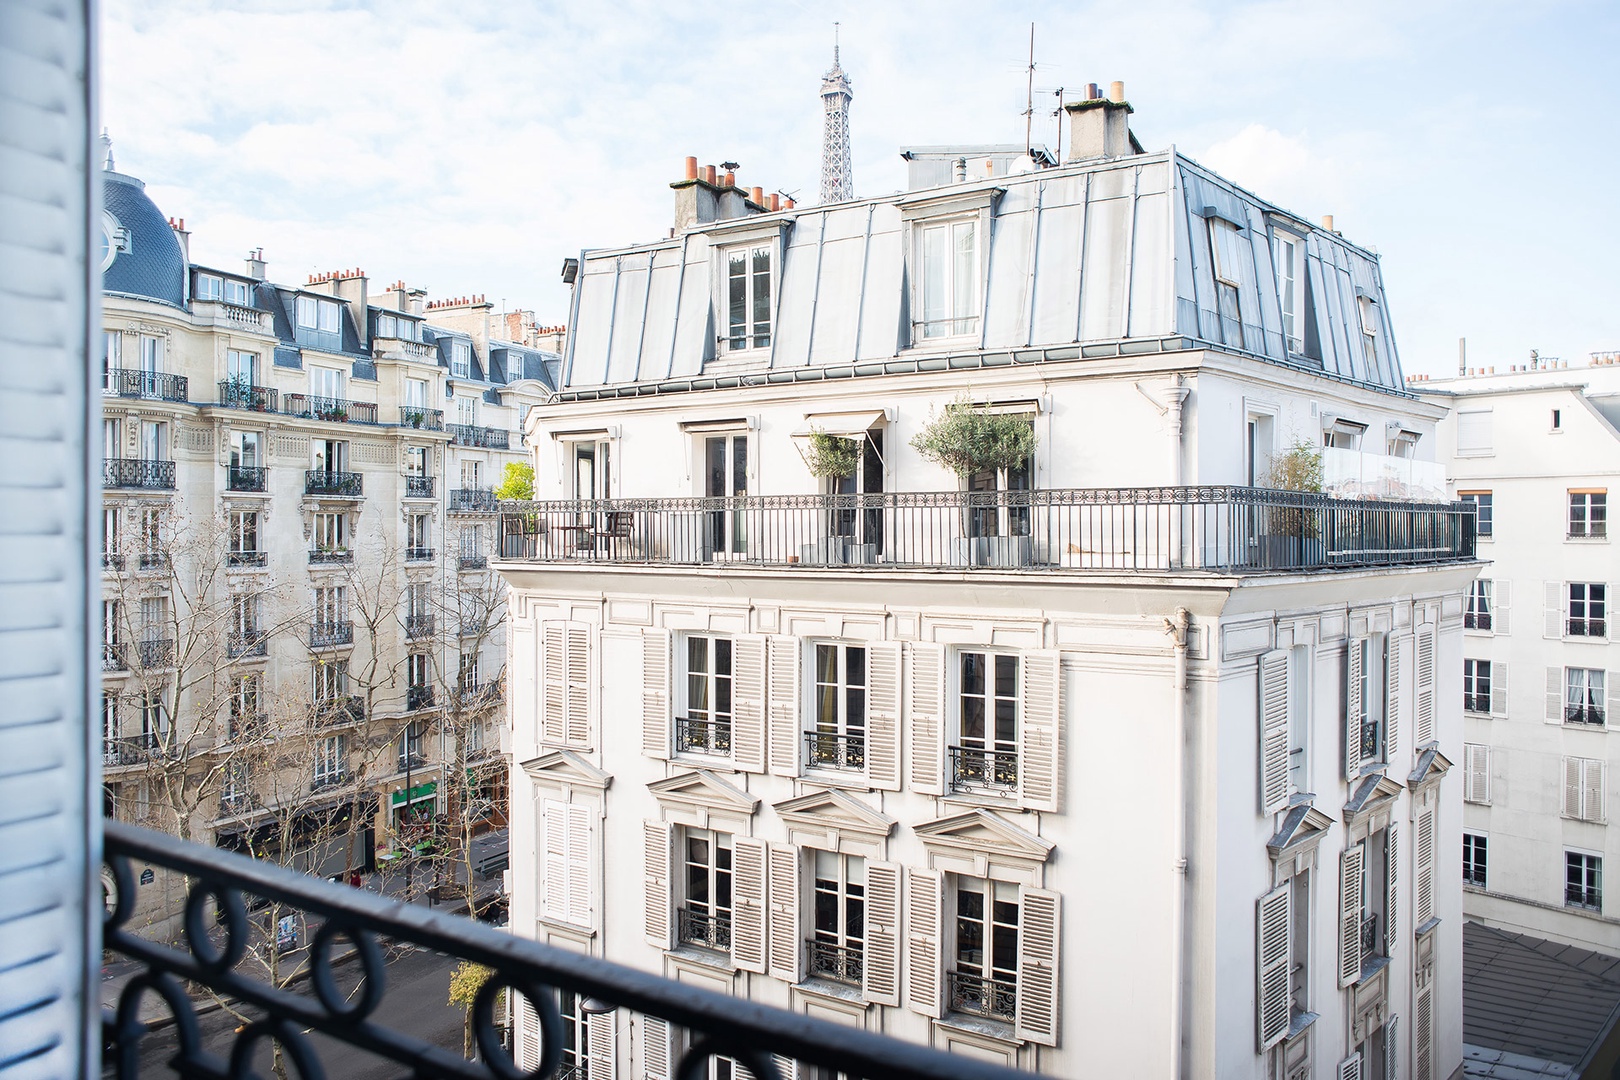 You'll have a gorgeous view of Parisian buildings and the Eiffel Tower.